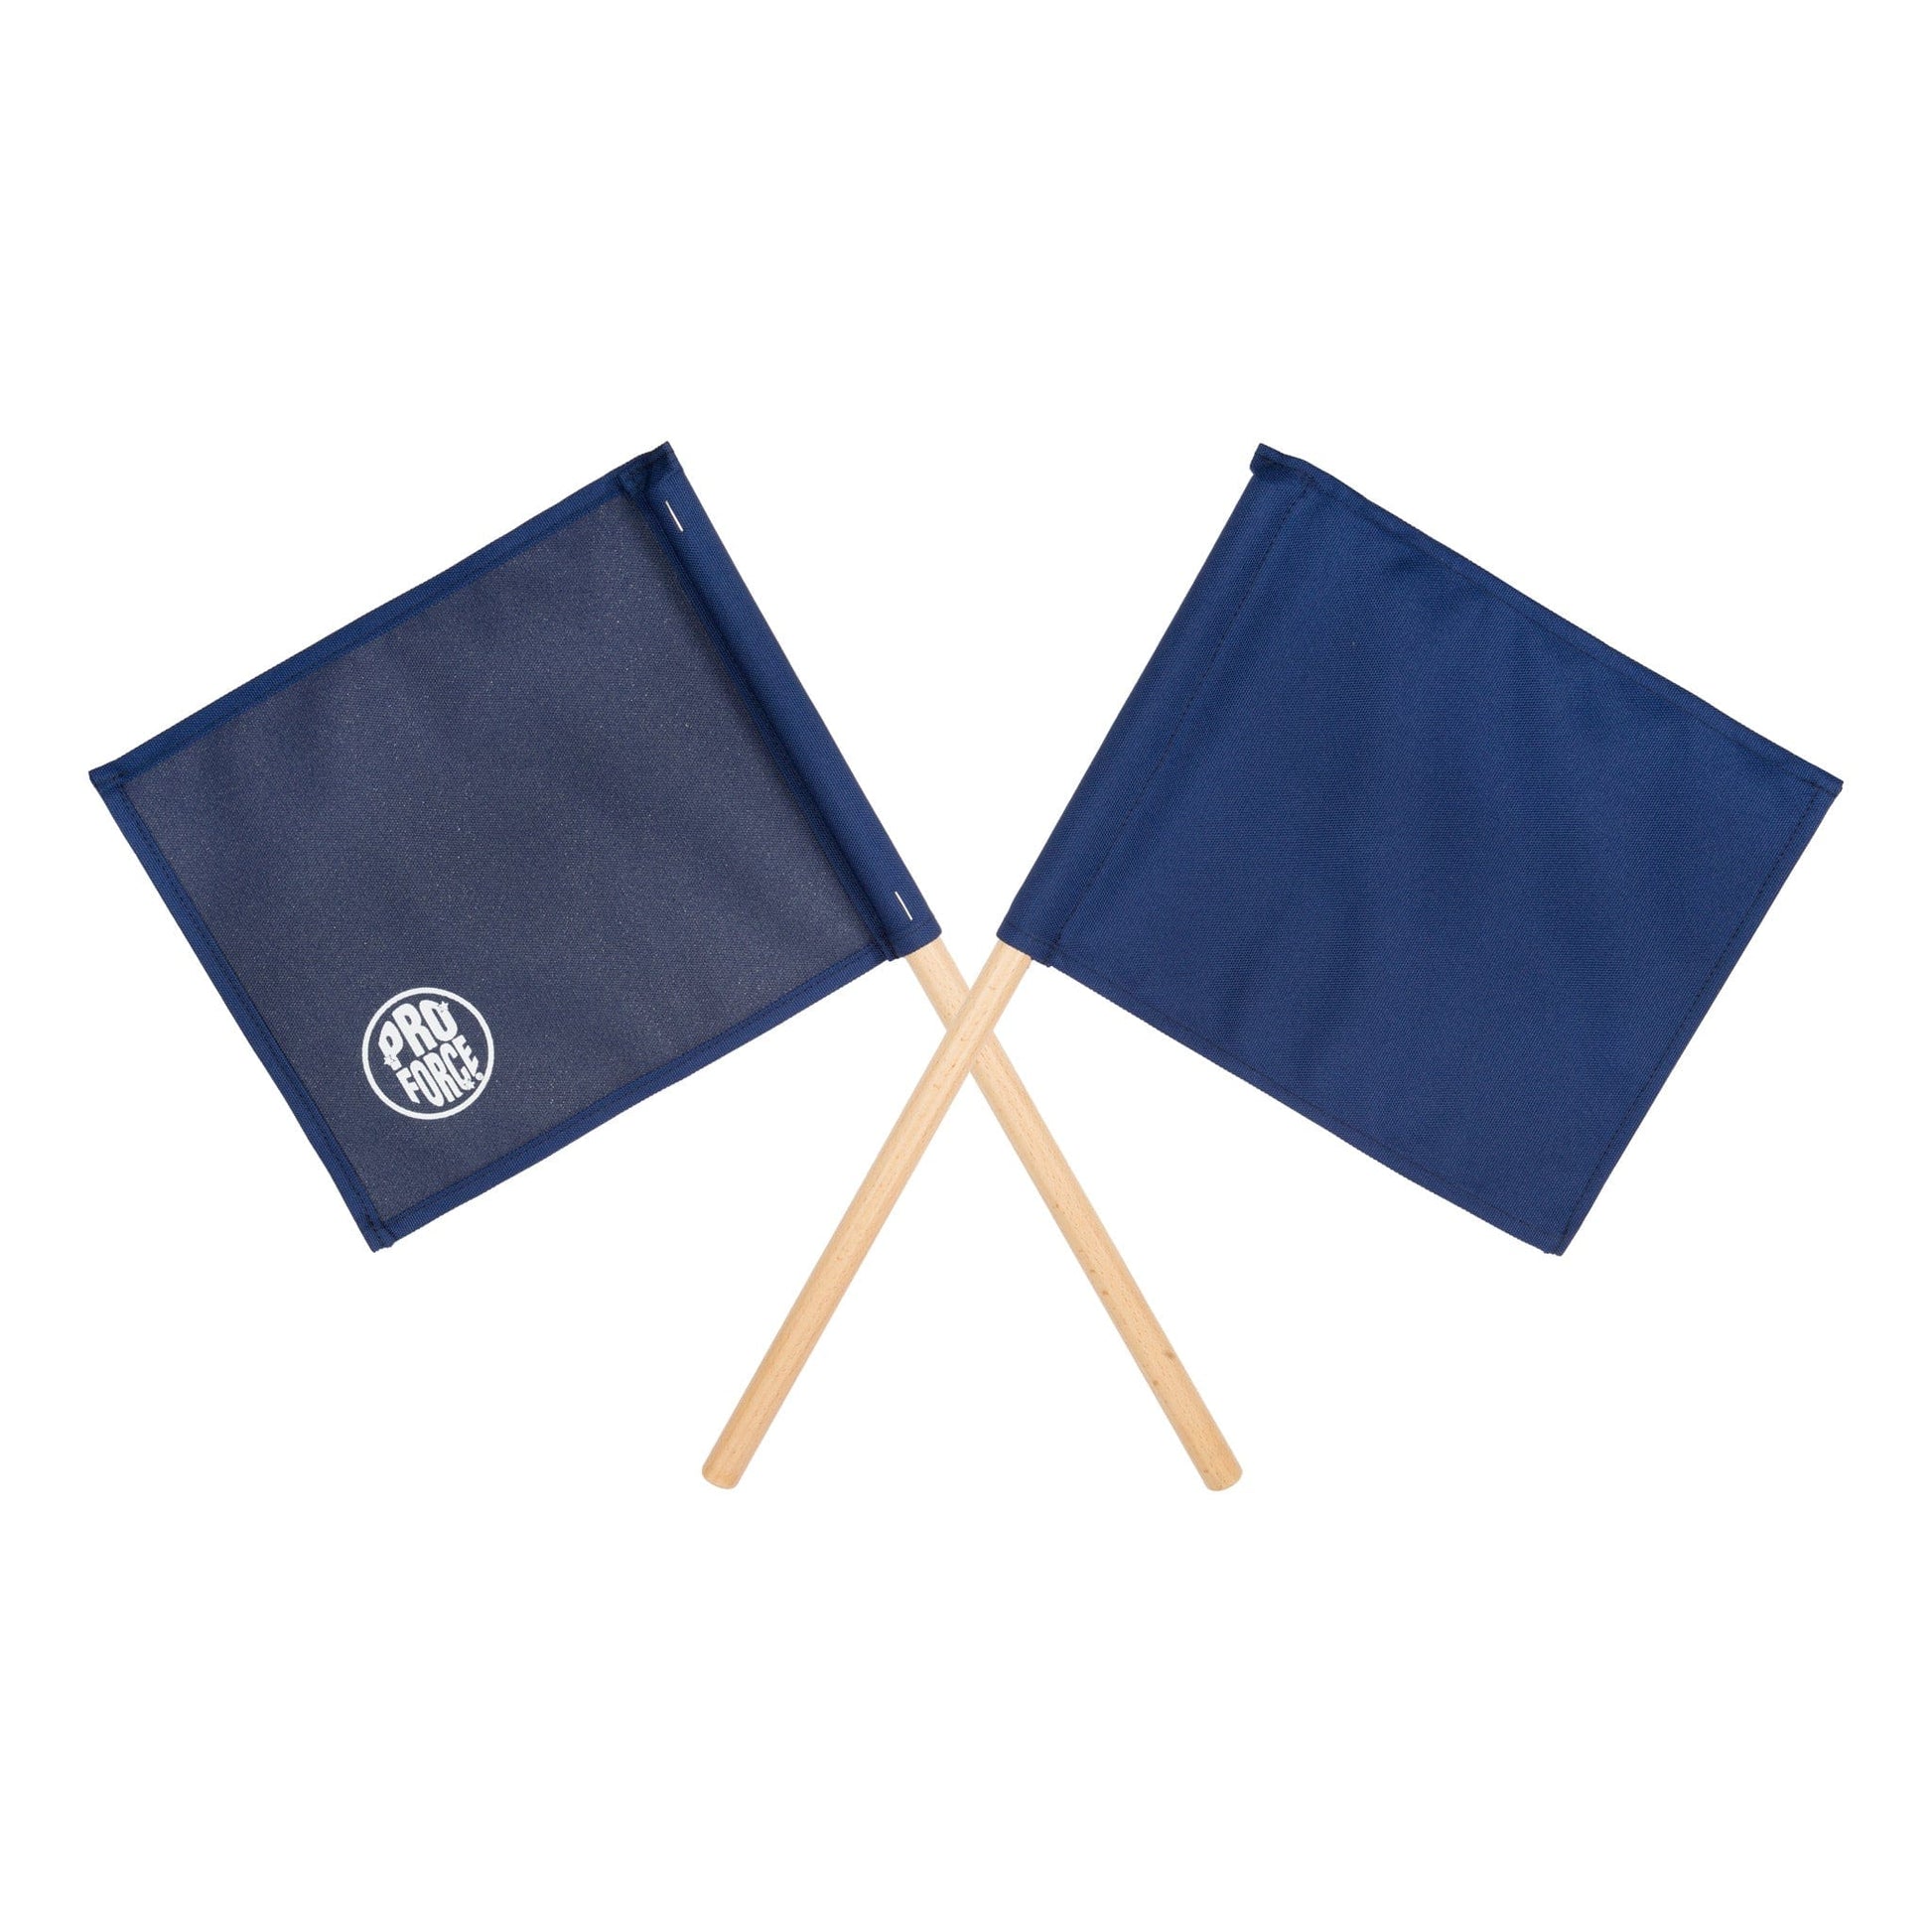 EclipseMartialArtSupplies sporting goods Blue Corner Flags for Sparring